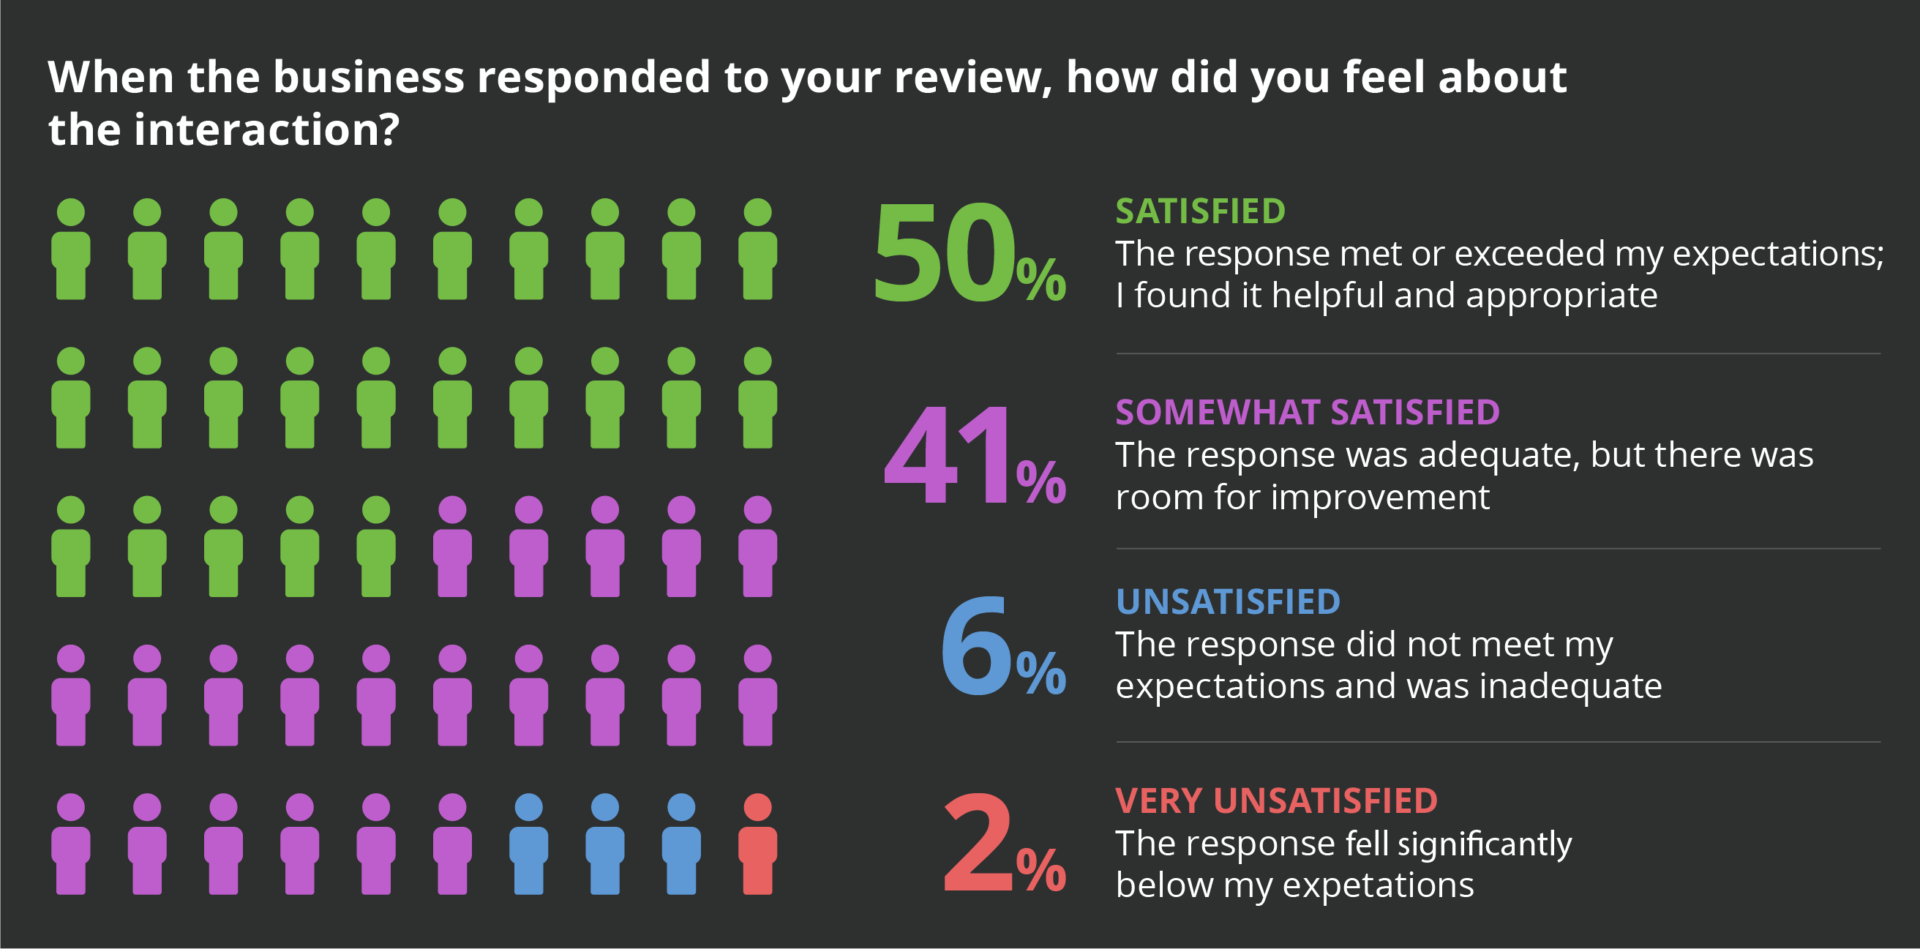 A chart from the CBI highlighting how consumers felt when a business responded to their review